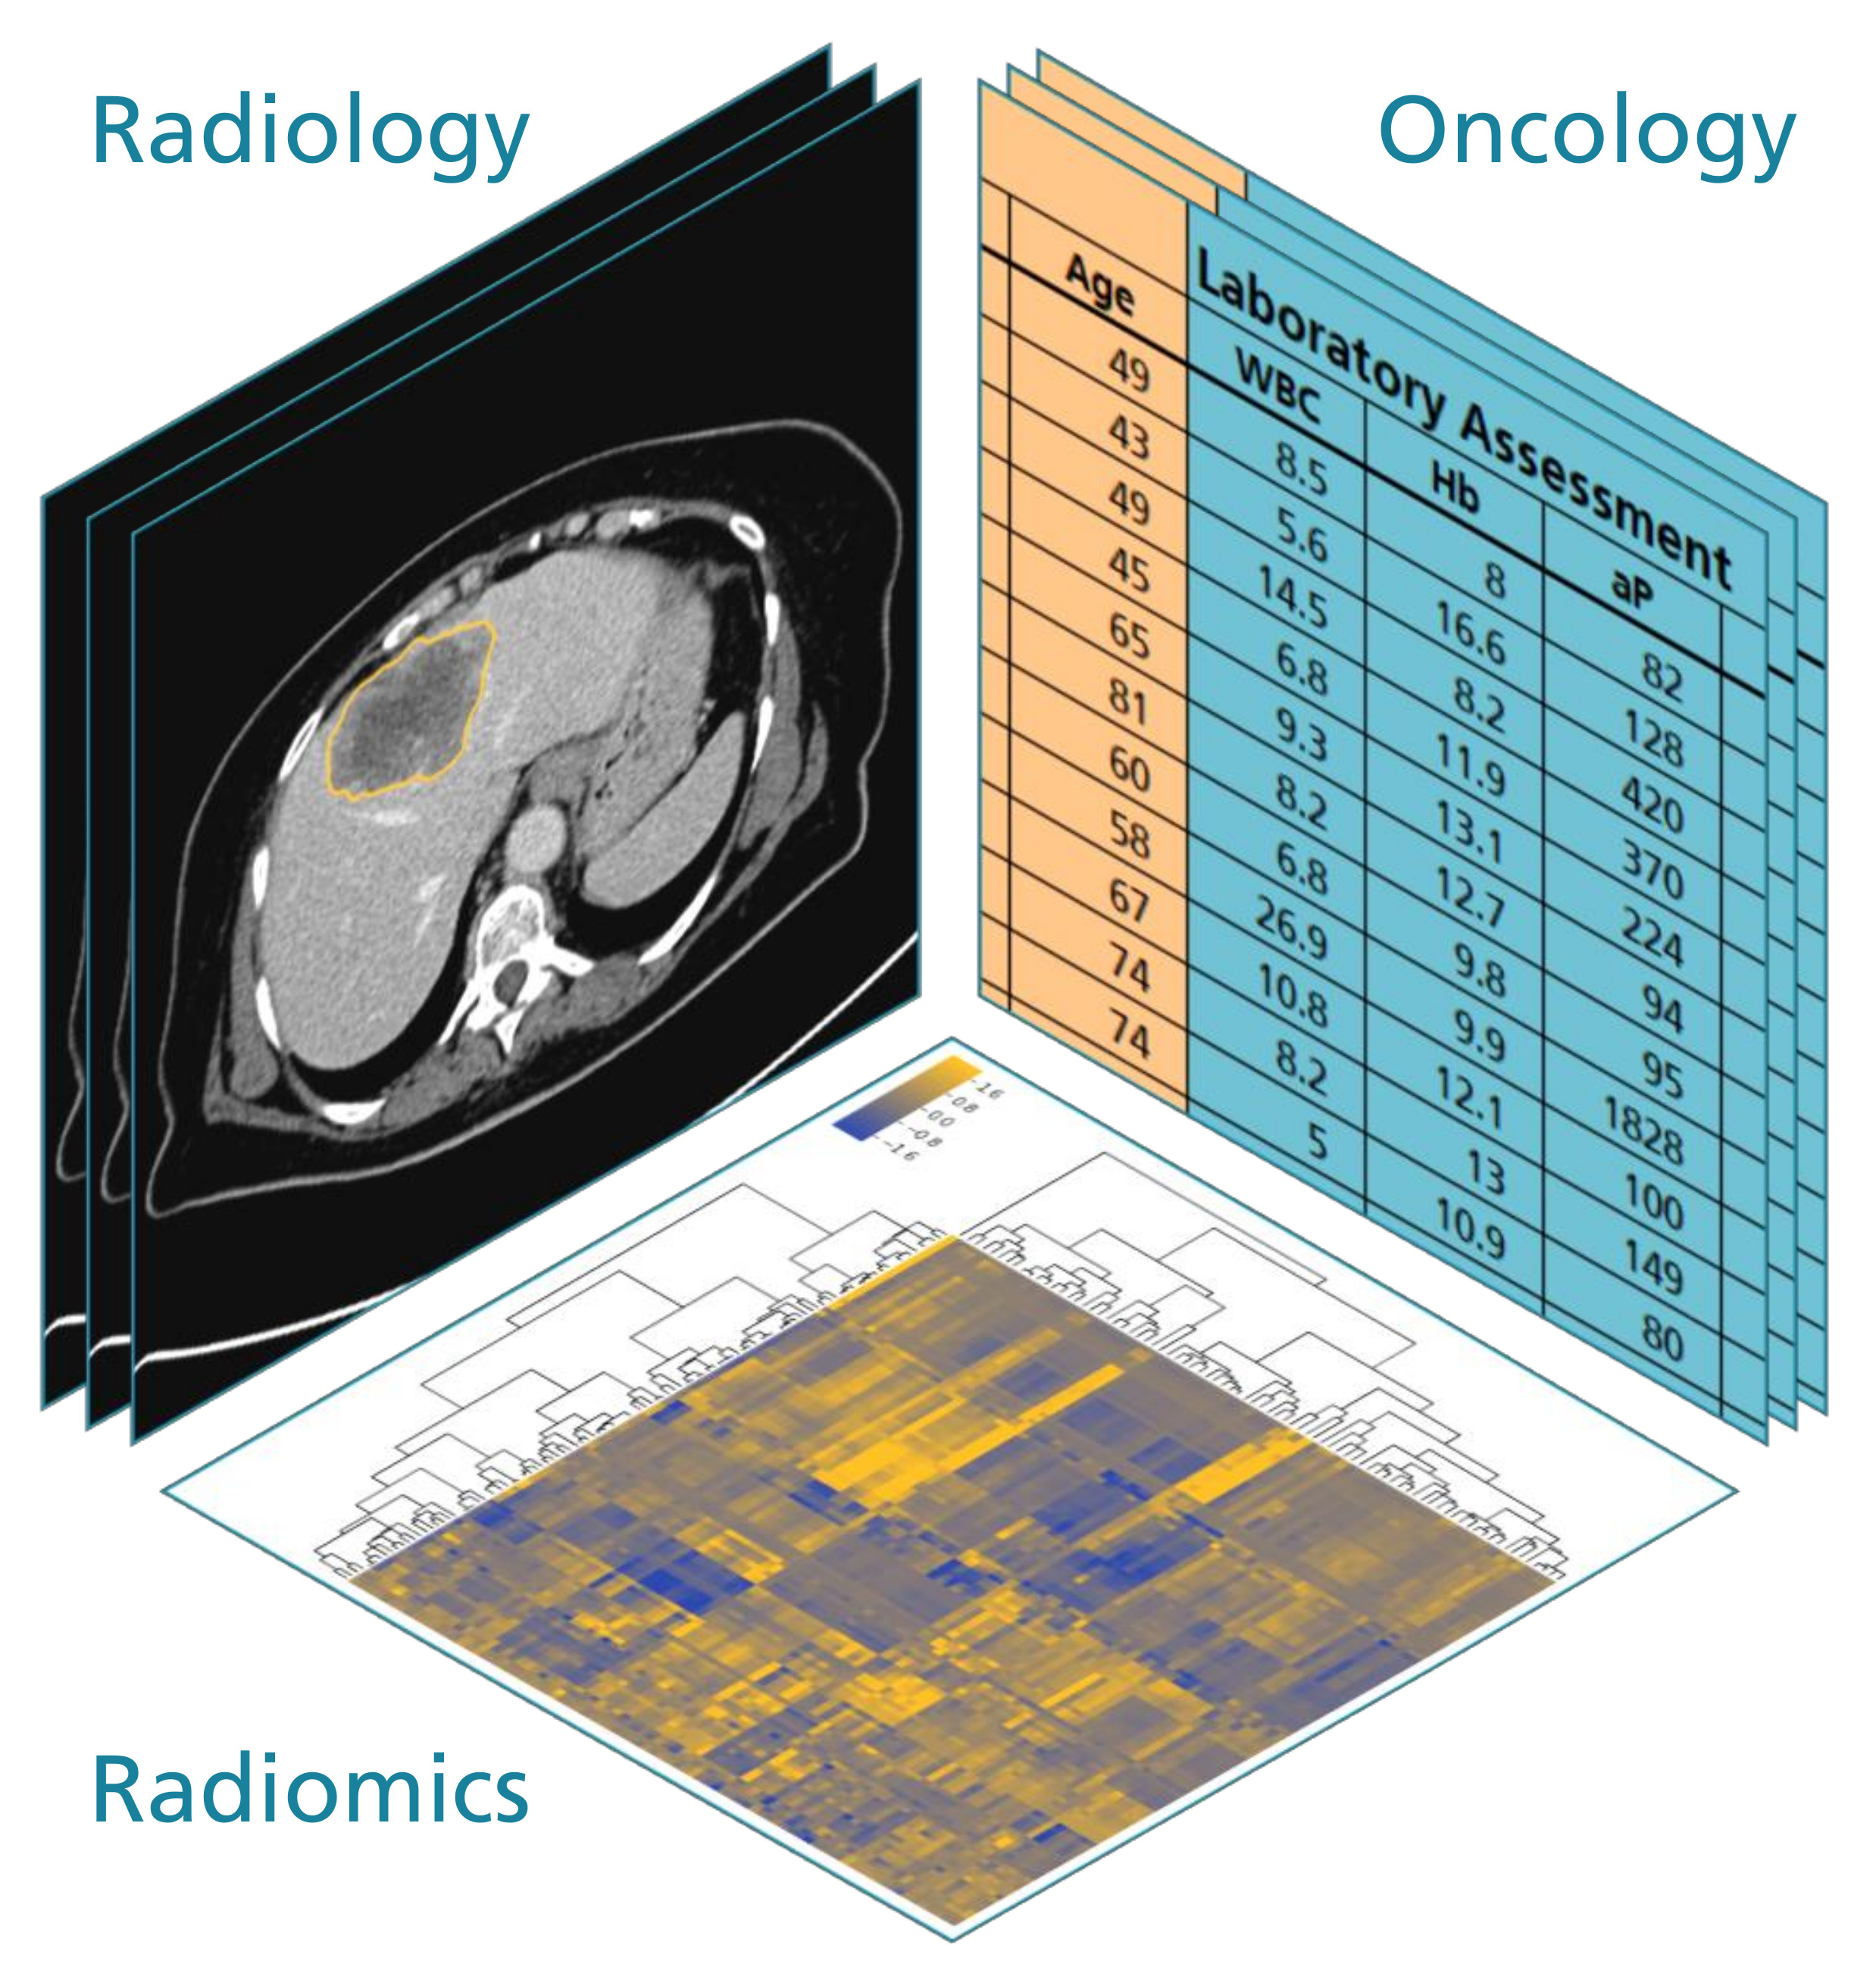 CT image, table with clinical parameters and heatmap showing their correlation